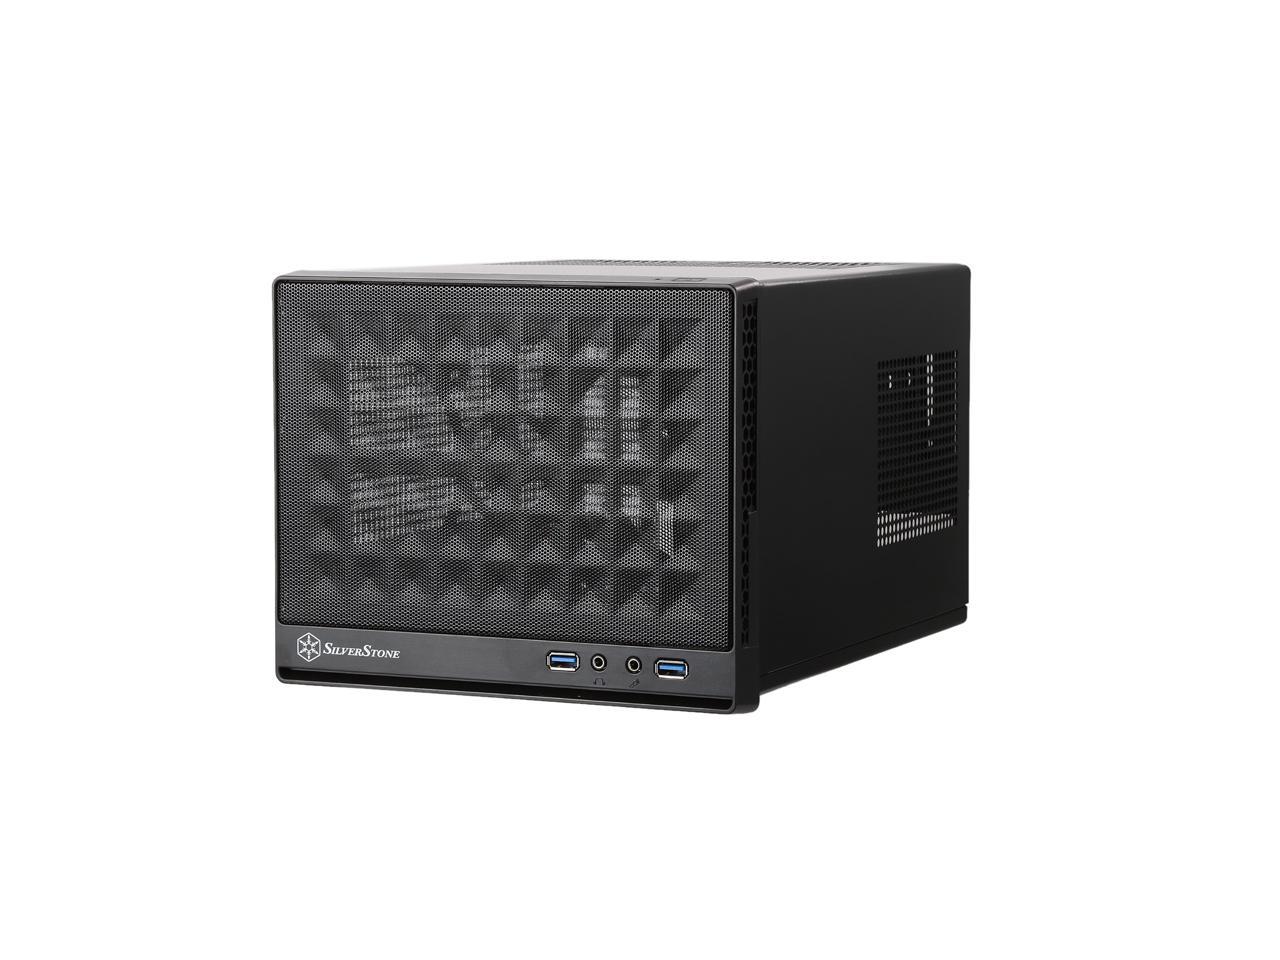 SilverStone SG13B Black Mesh front panel, steel body Computer Case  Compatible with standard ATX12V/EPS12V Power Supply